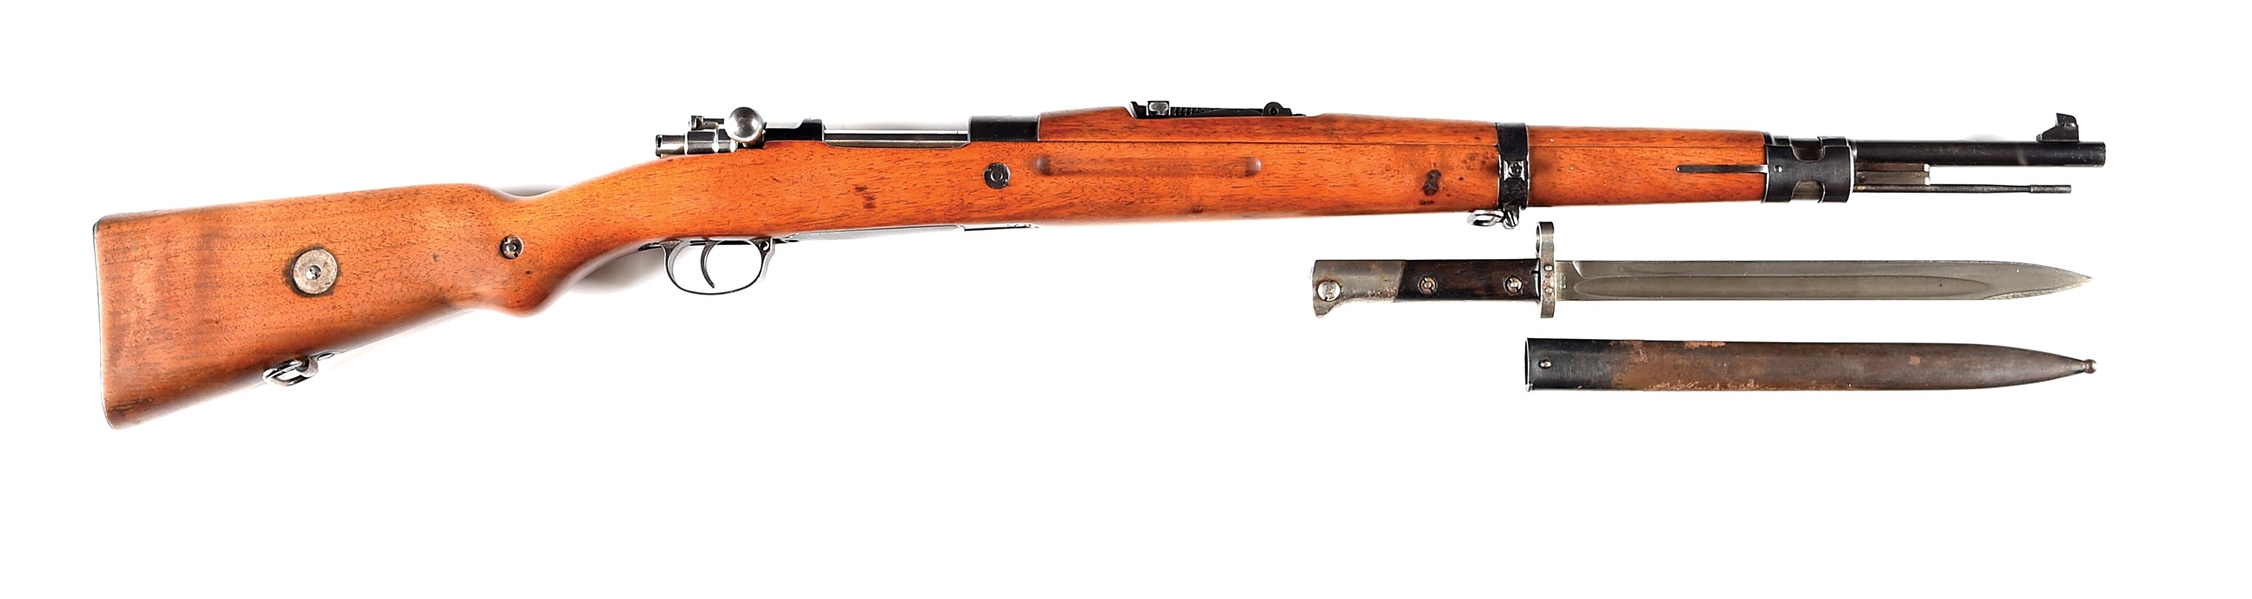 (C) EXTREMELY RARE CHINESE CONTRACT VZ. 24 BOLT ACTION SHORT RIFLE.